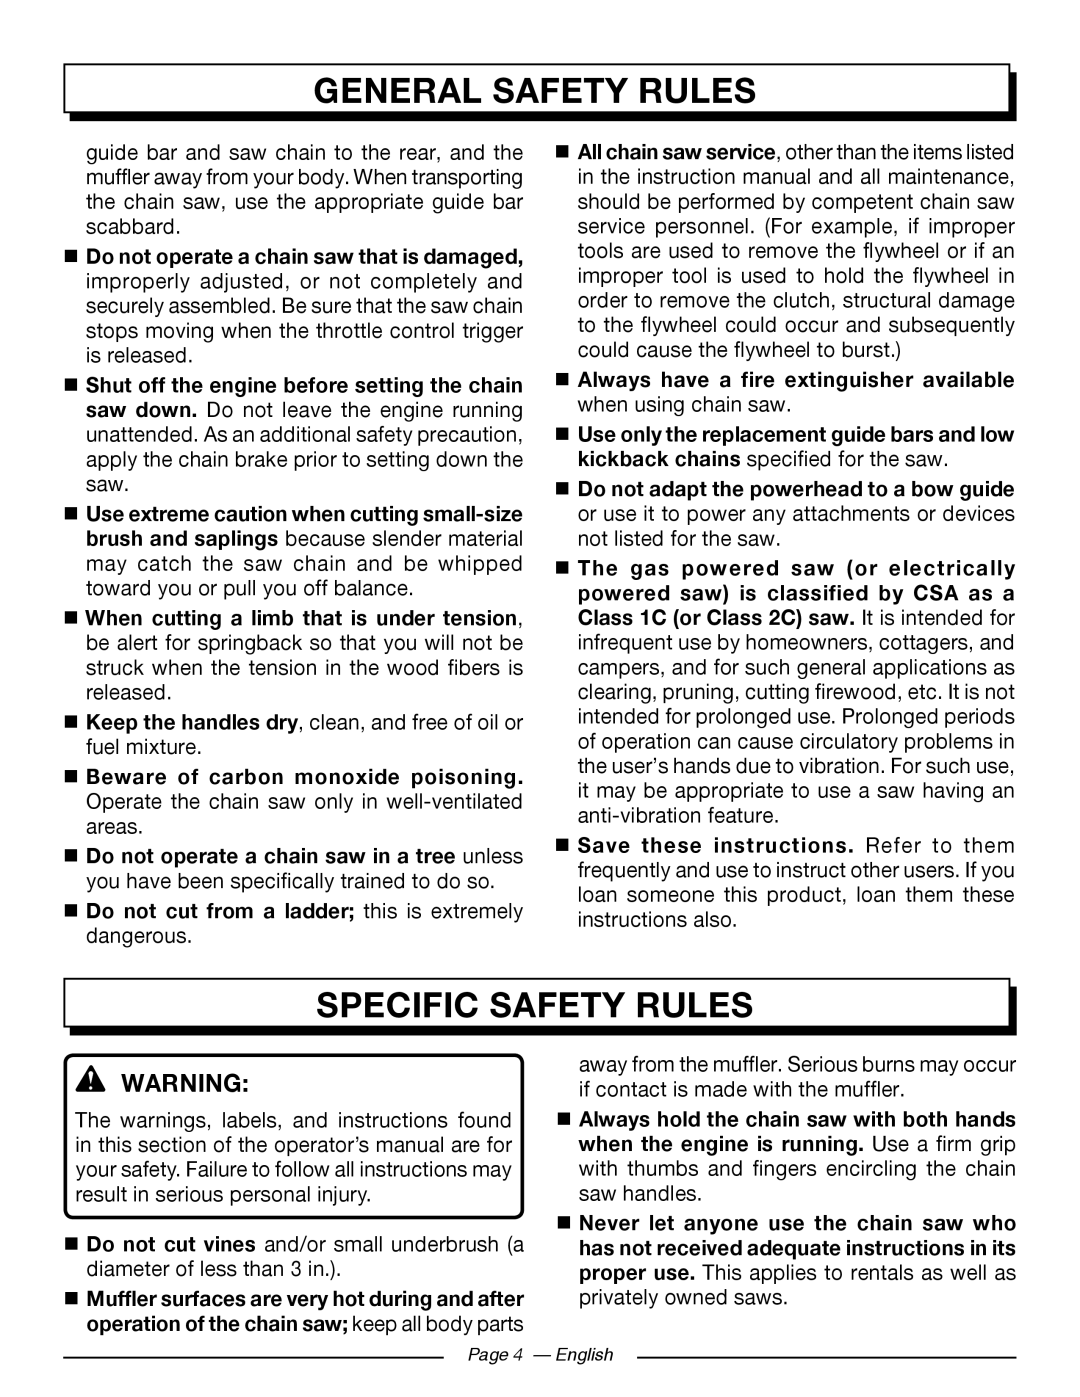 Homelite UT10546, UT10586, UT10584 Specific Safety Rules,  Do not adapt the powerhead to a bow guide, General Safety Rules 